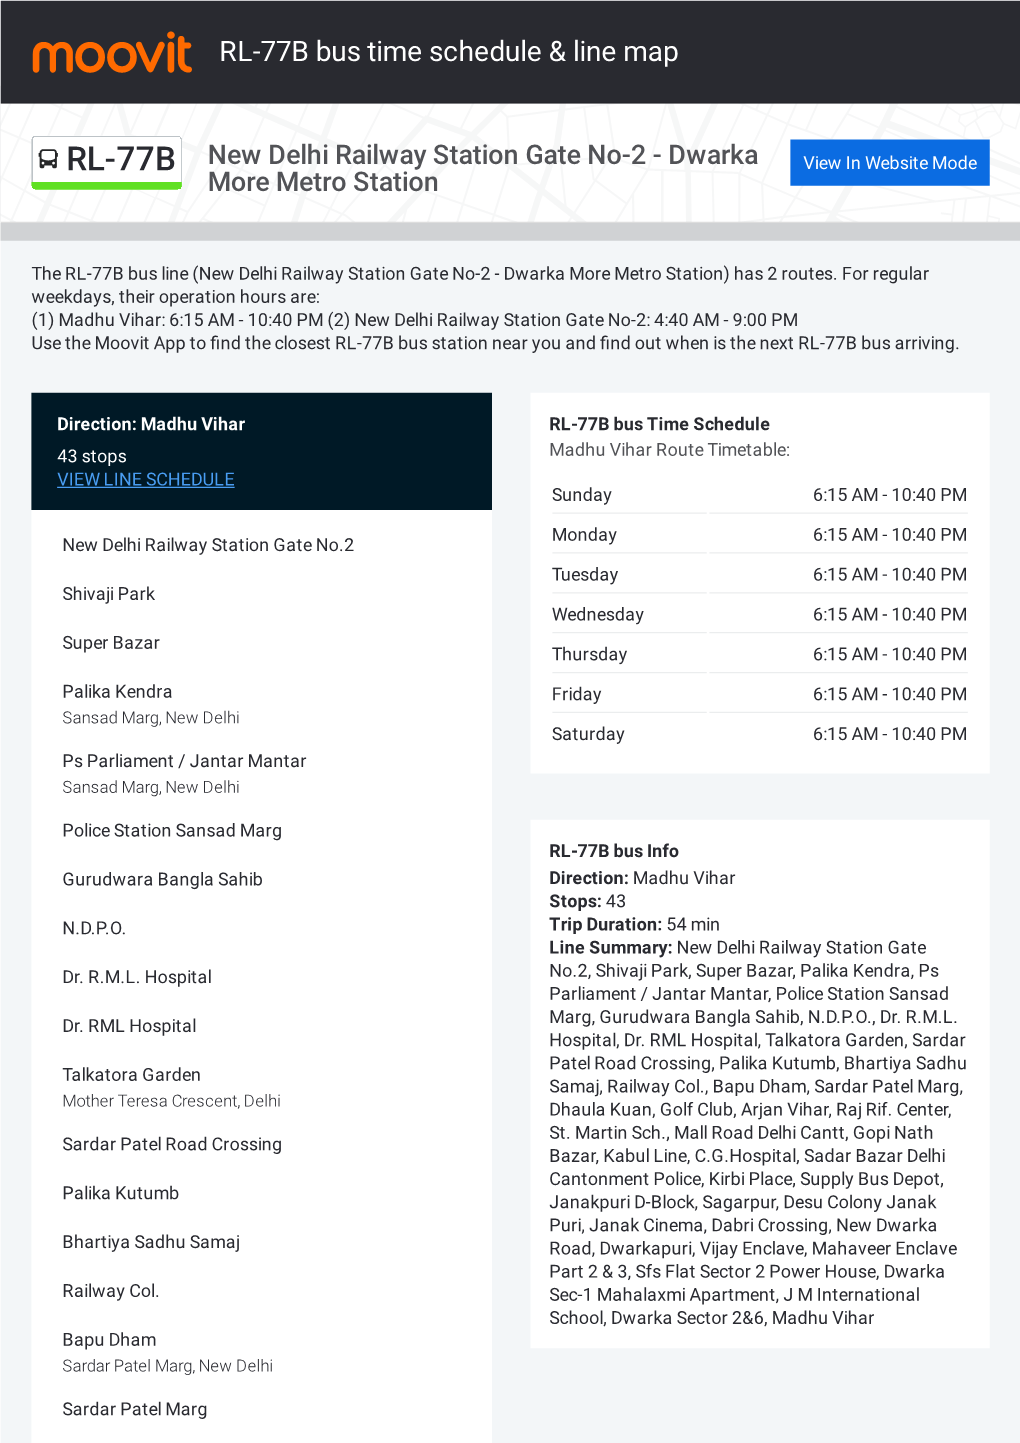 RL-77B Bus Time Schedule & Line Route